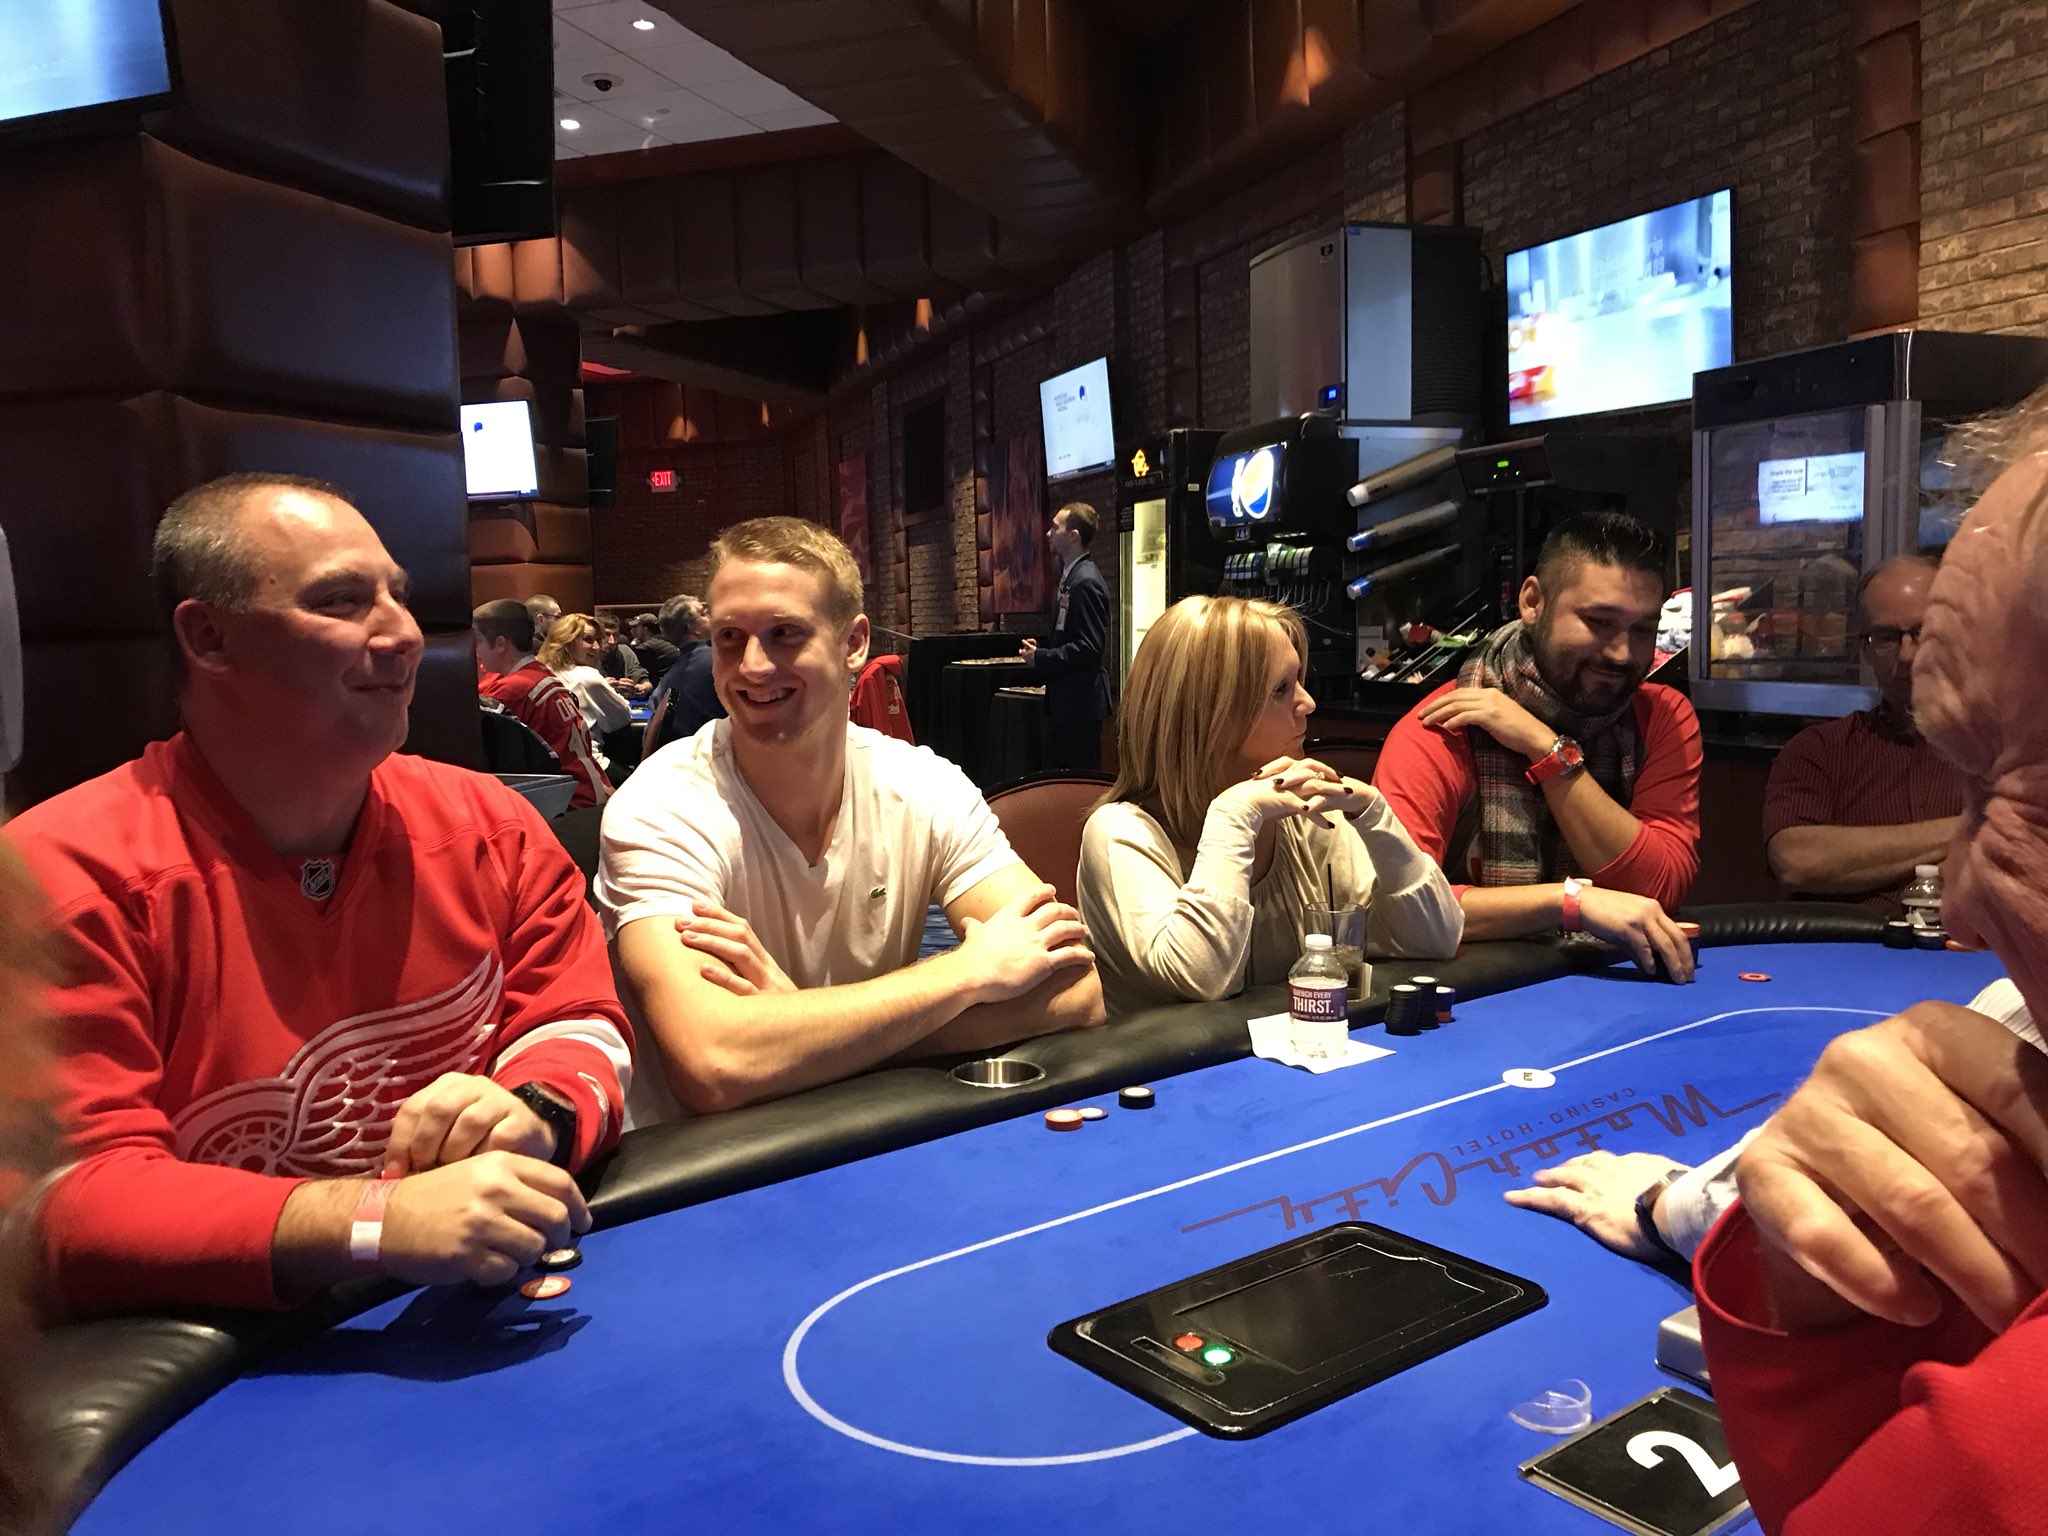 Detroit Wings on Twitter: "9th annual @MotorCityCasino #RedWings Poker Tournament happening now! Who gets out first? #LGRW https://t.co/JQP8WzkzVe" / Twitter